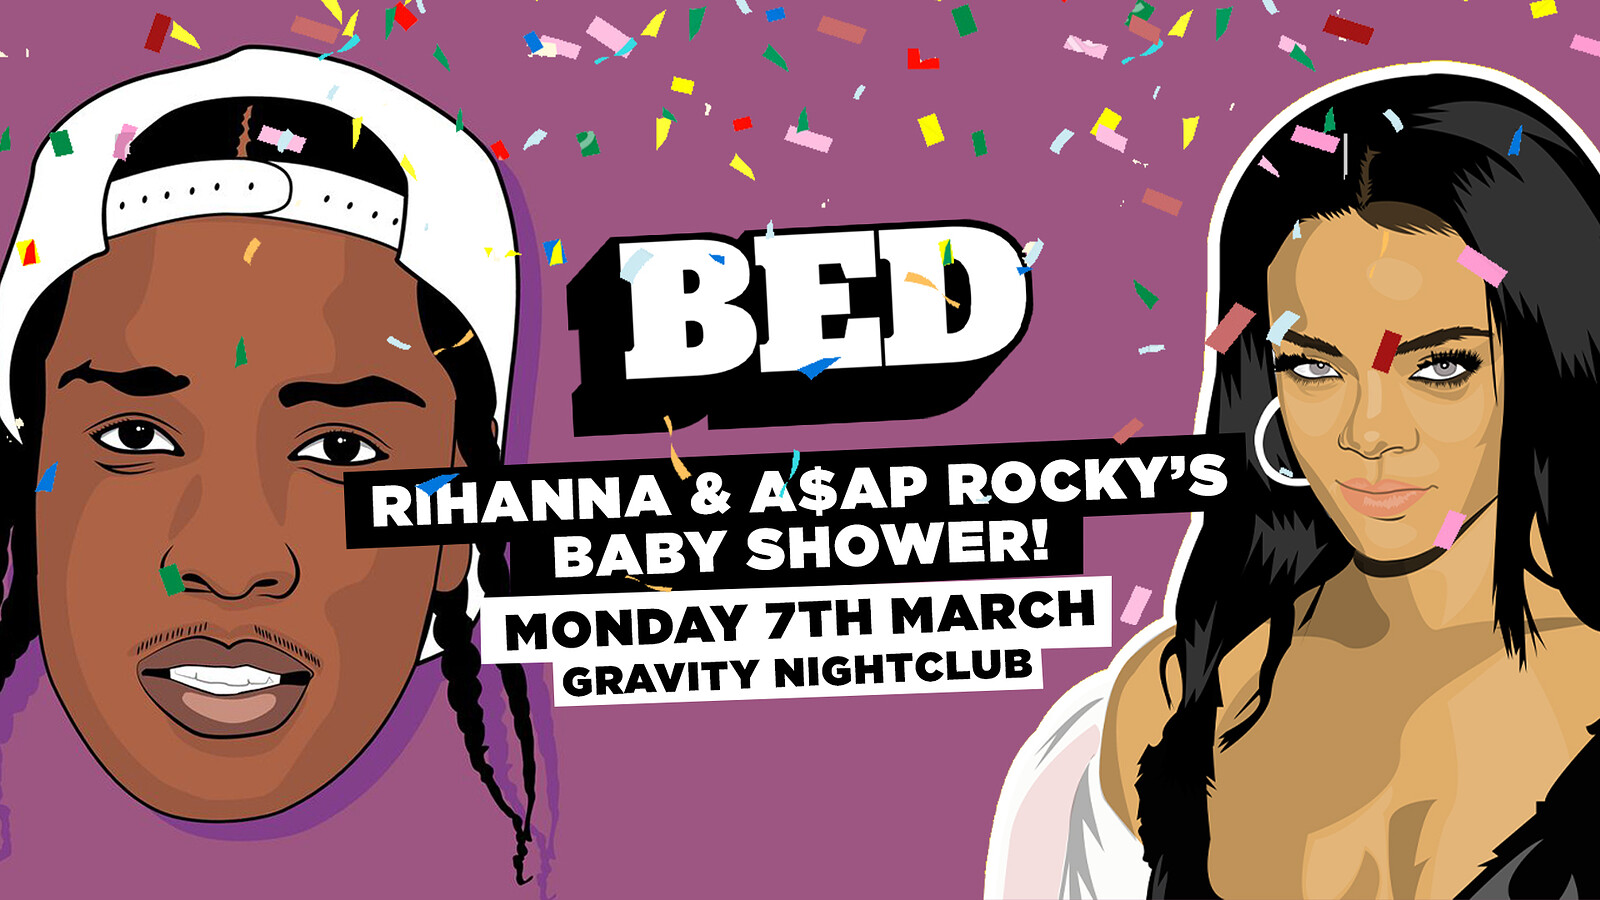 BED: Rihanna & A$AP Rocky's Baby Shower at Gravity